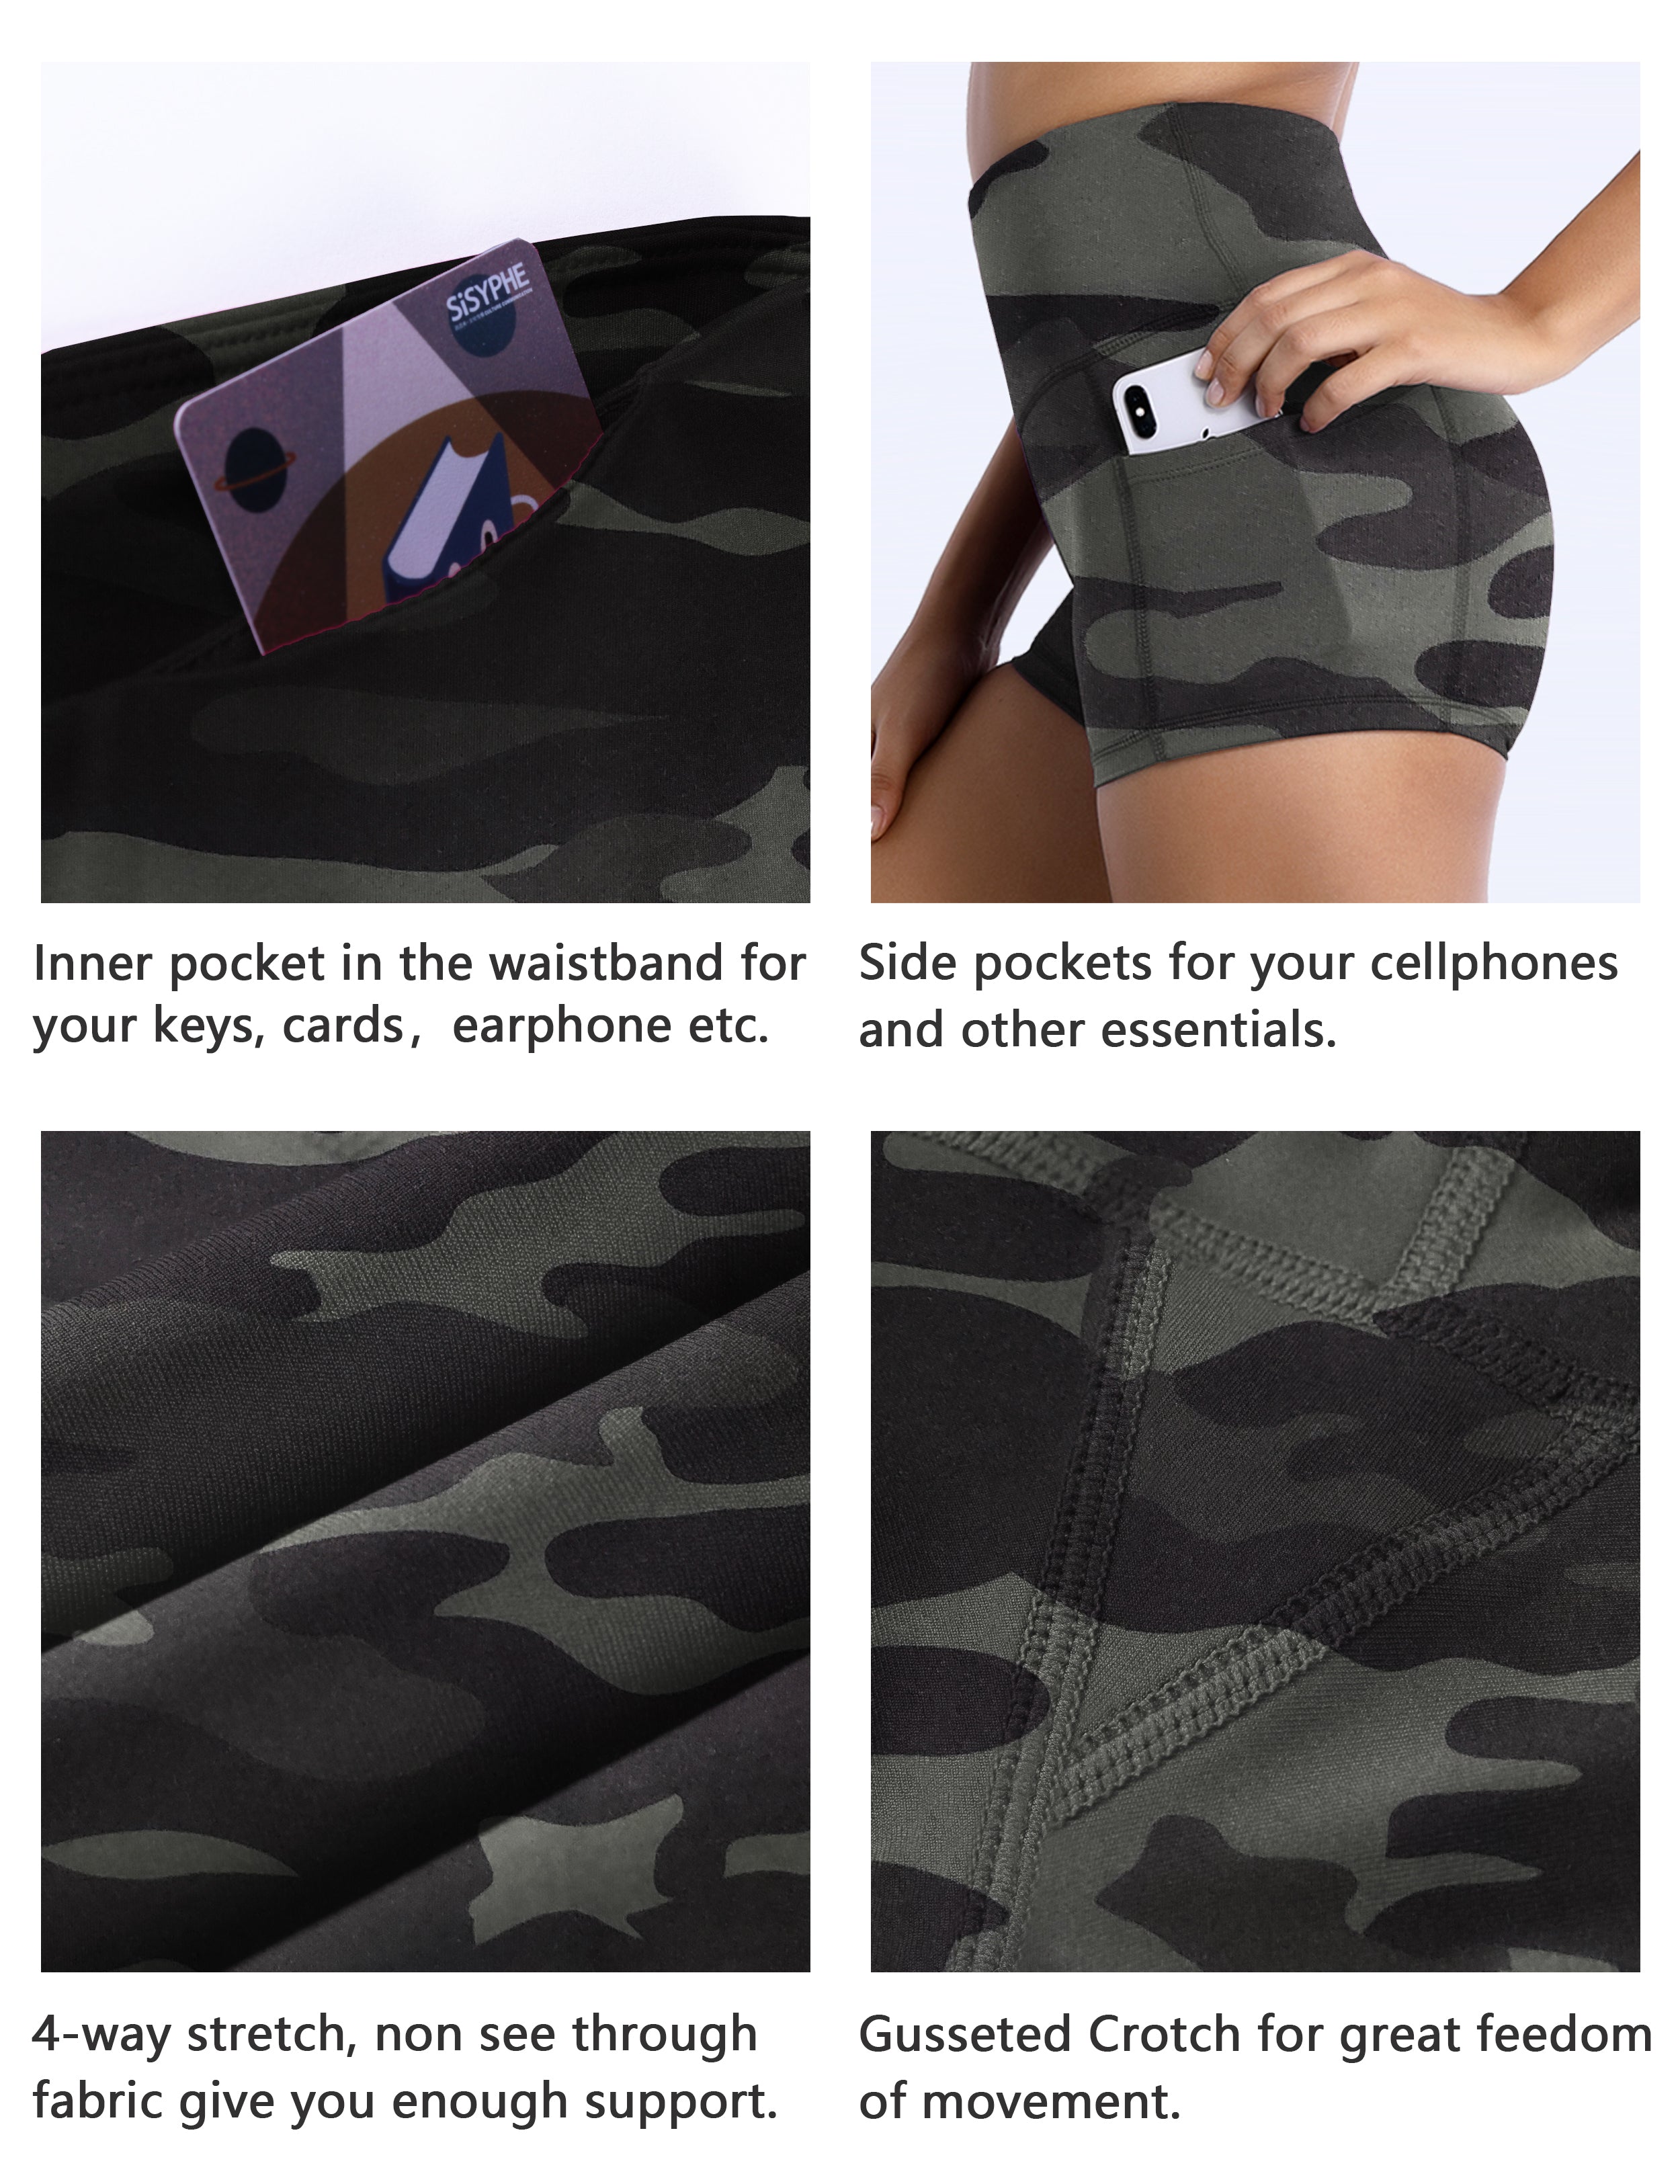 2.5" Printed Side Pockets yogastudio Shorts dimgraycamo Sleek, soft, smooth and totally comfortable: our newest sexy style is here. Softest-ever fabric High elasticity High density 4-way stretch Fabric doesn't attract lint easily No see-through Moisture-wicking Machine wash 78% Polyester, 22% Spandex